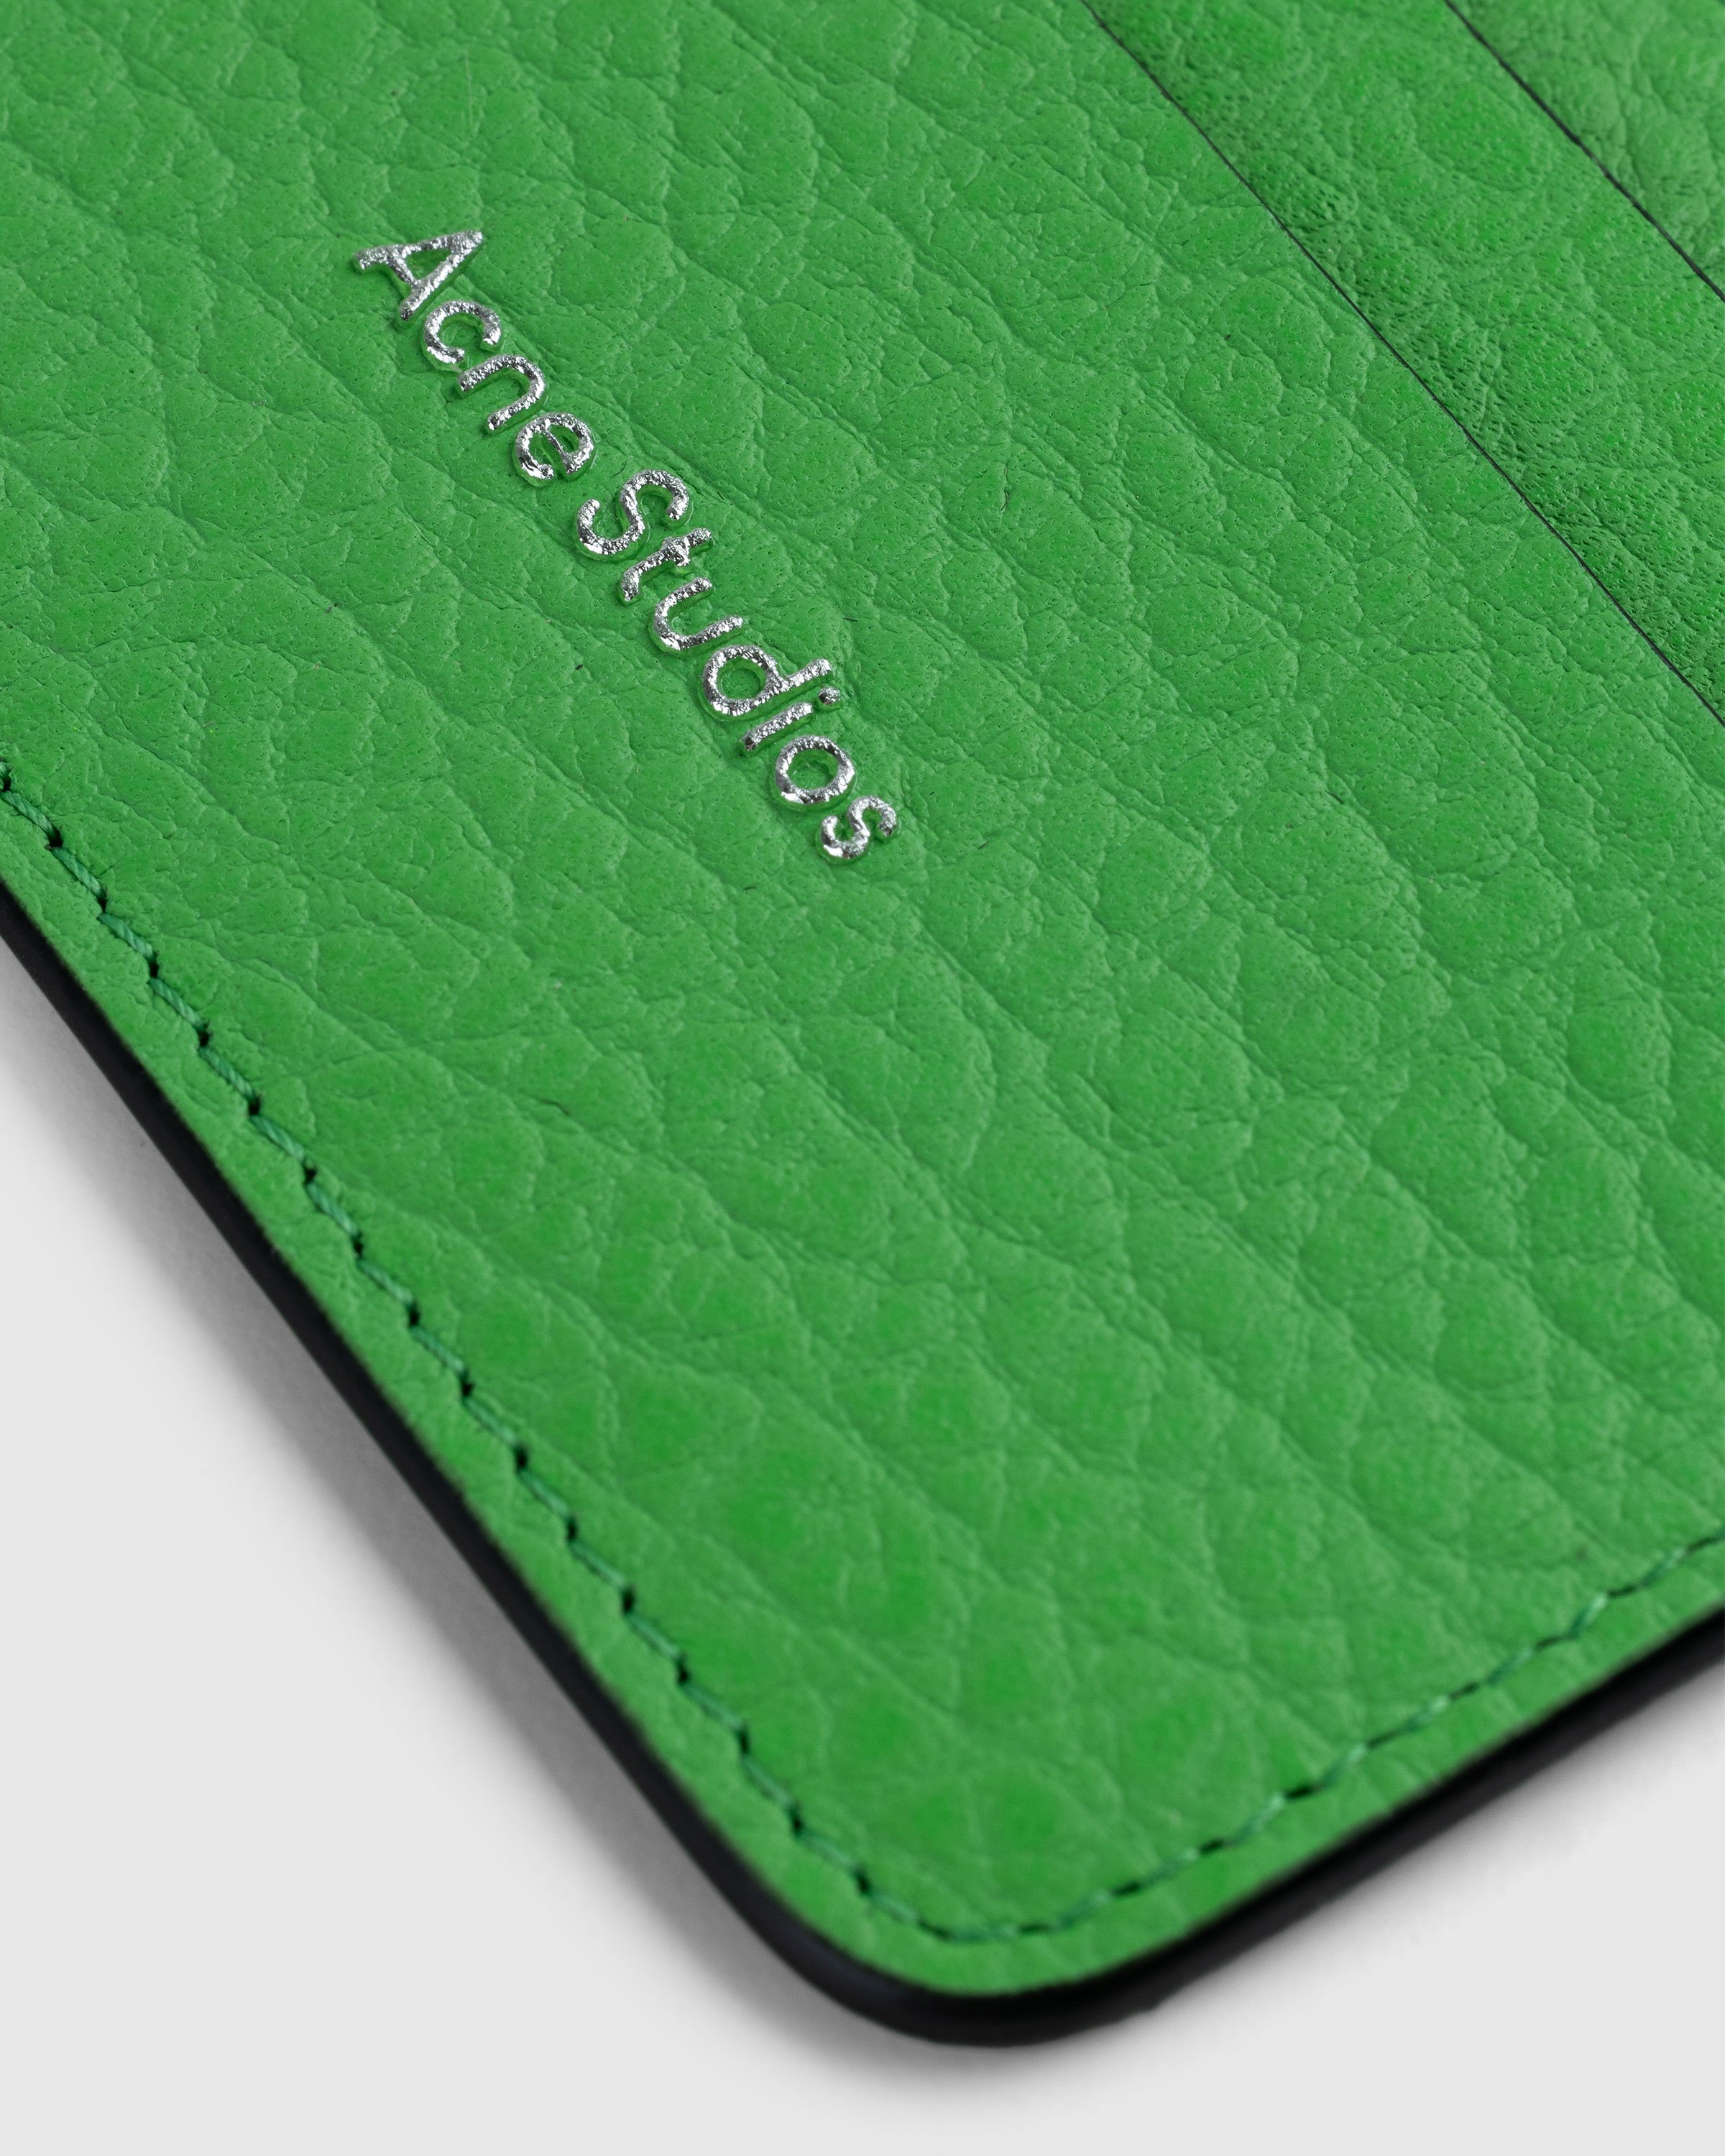 Acne Studios - FN-UX-SLGS000275 GREEN - Accessories - Green - Image 3